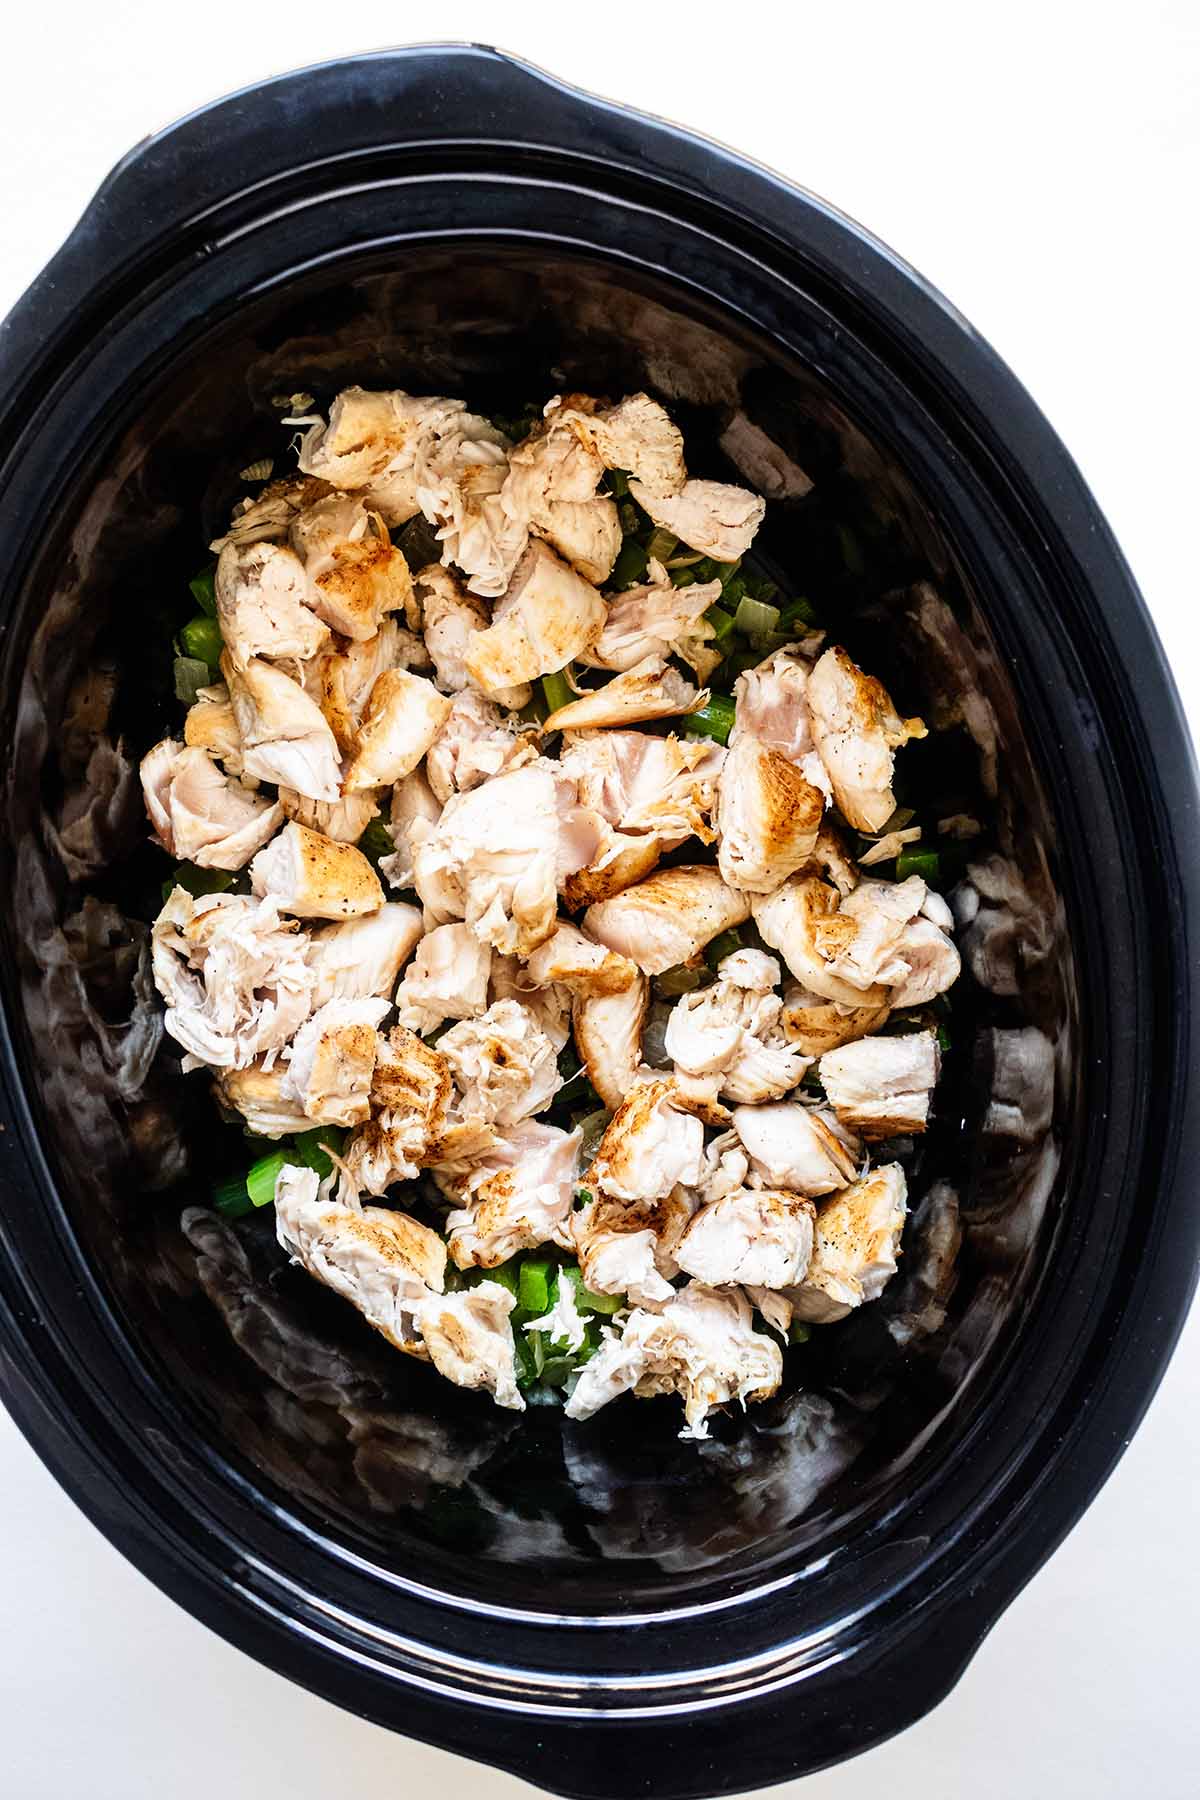 Seared chicken and cooked onion and celery in a slow cooker.